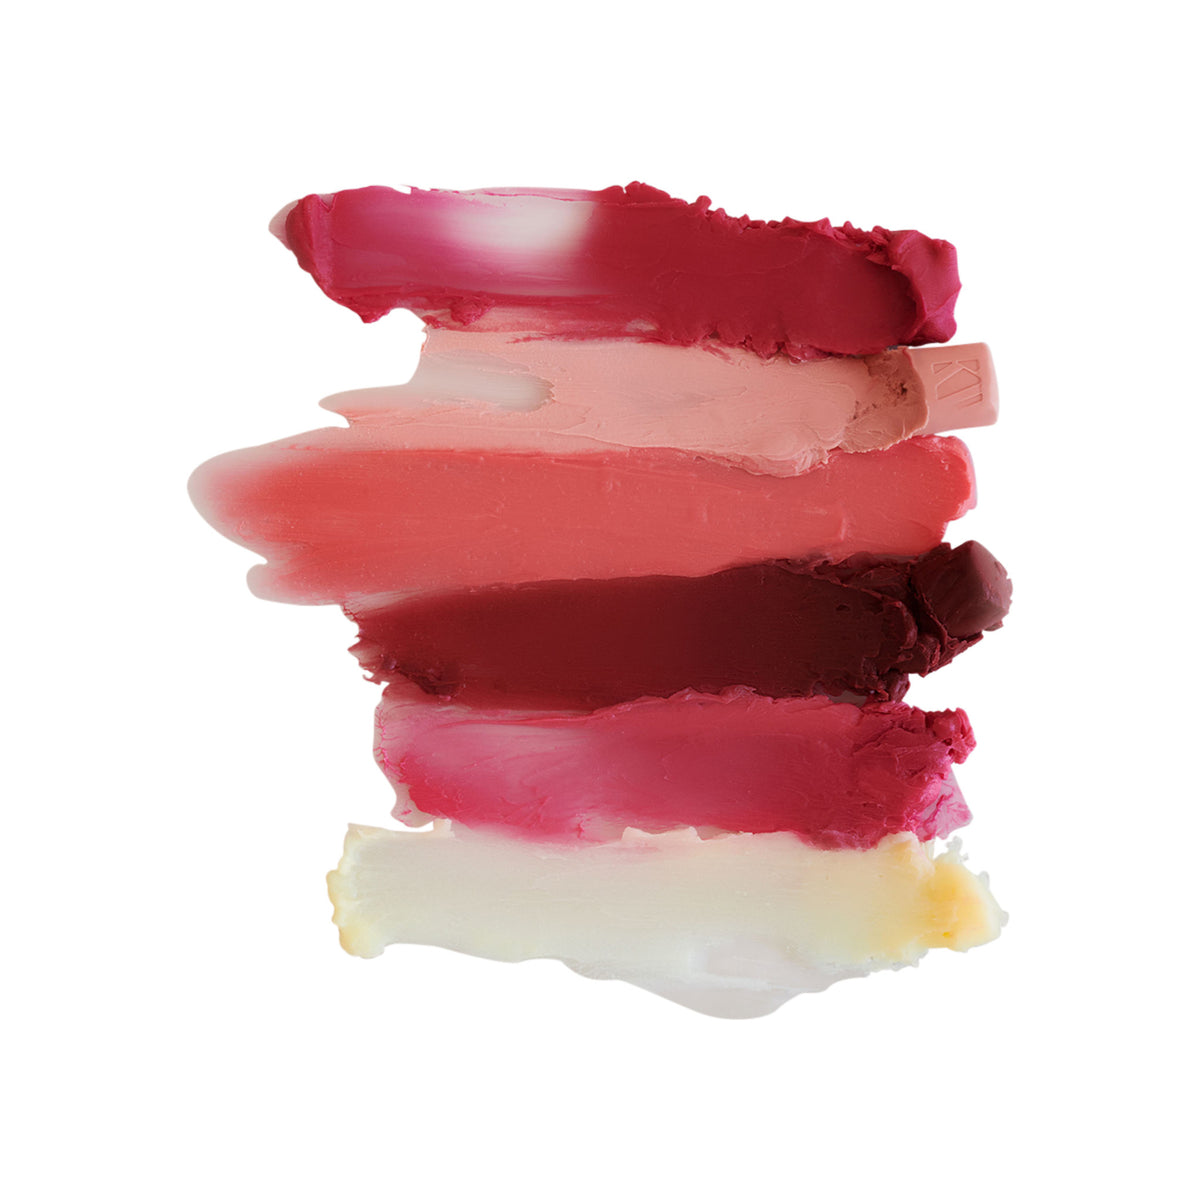 Kjaer Weis Tinted Lip Balm Refill . This product is in the color clear